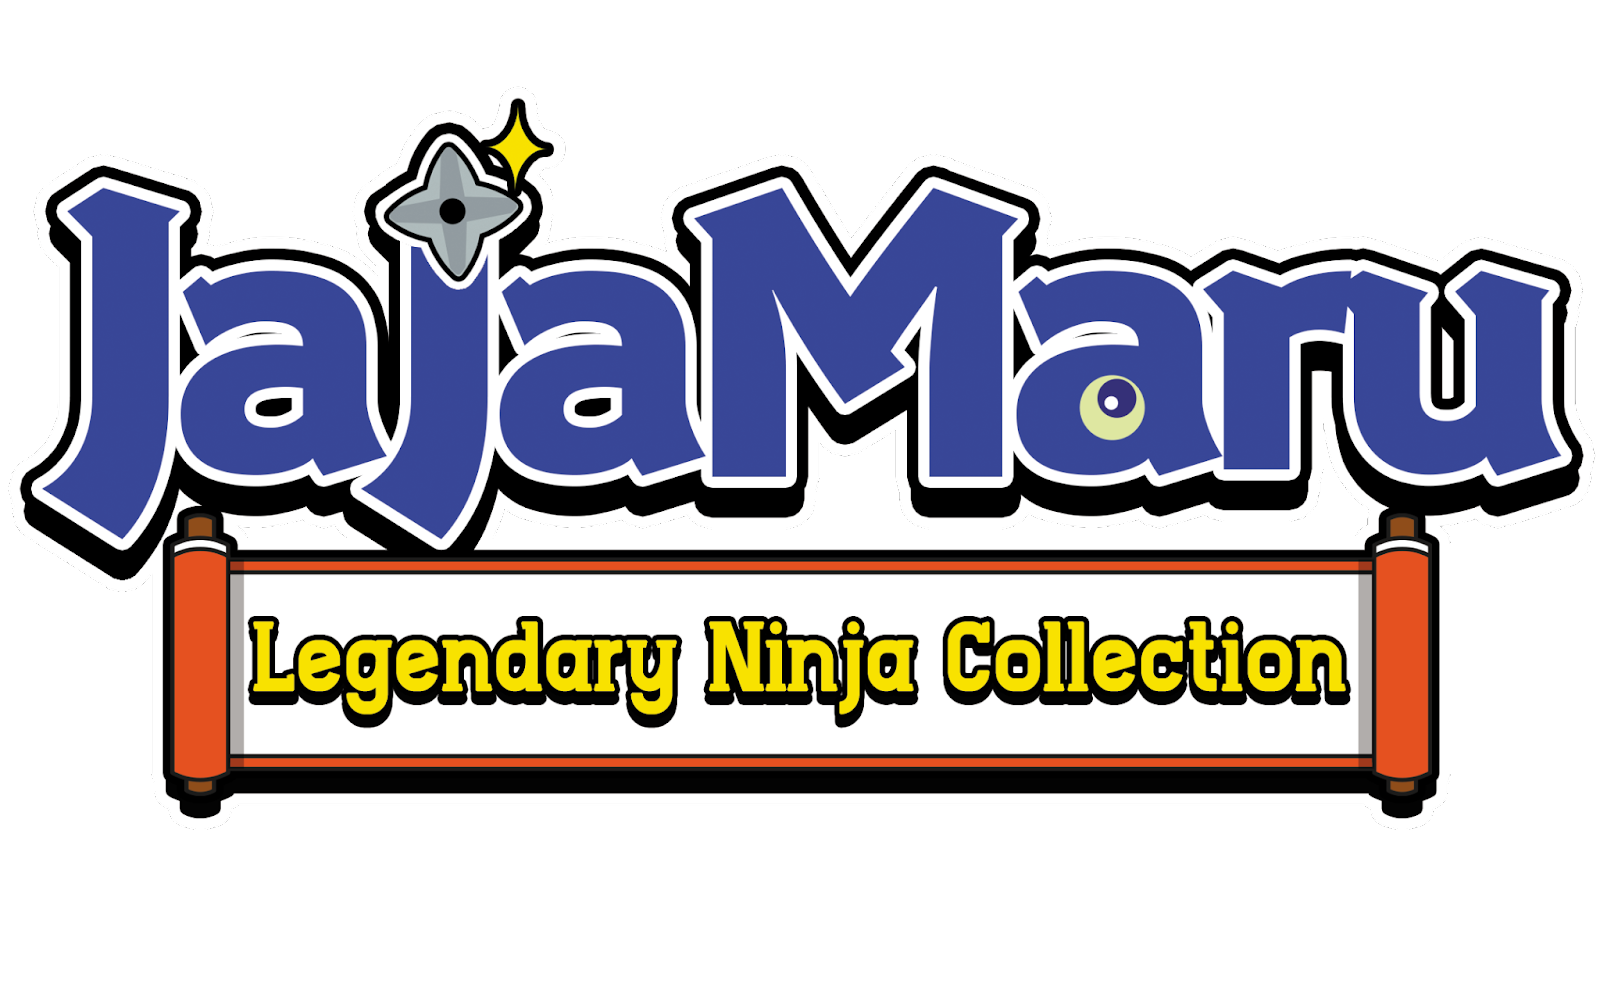 Official logo of the Legendary Ninja Collection